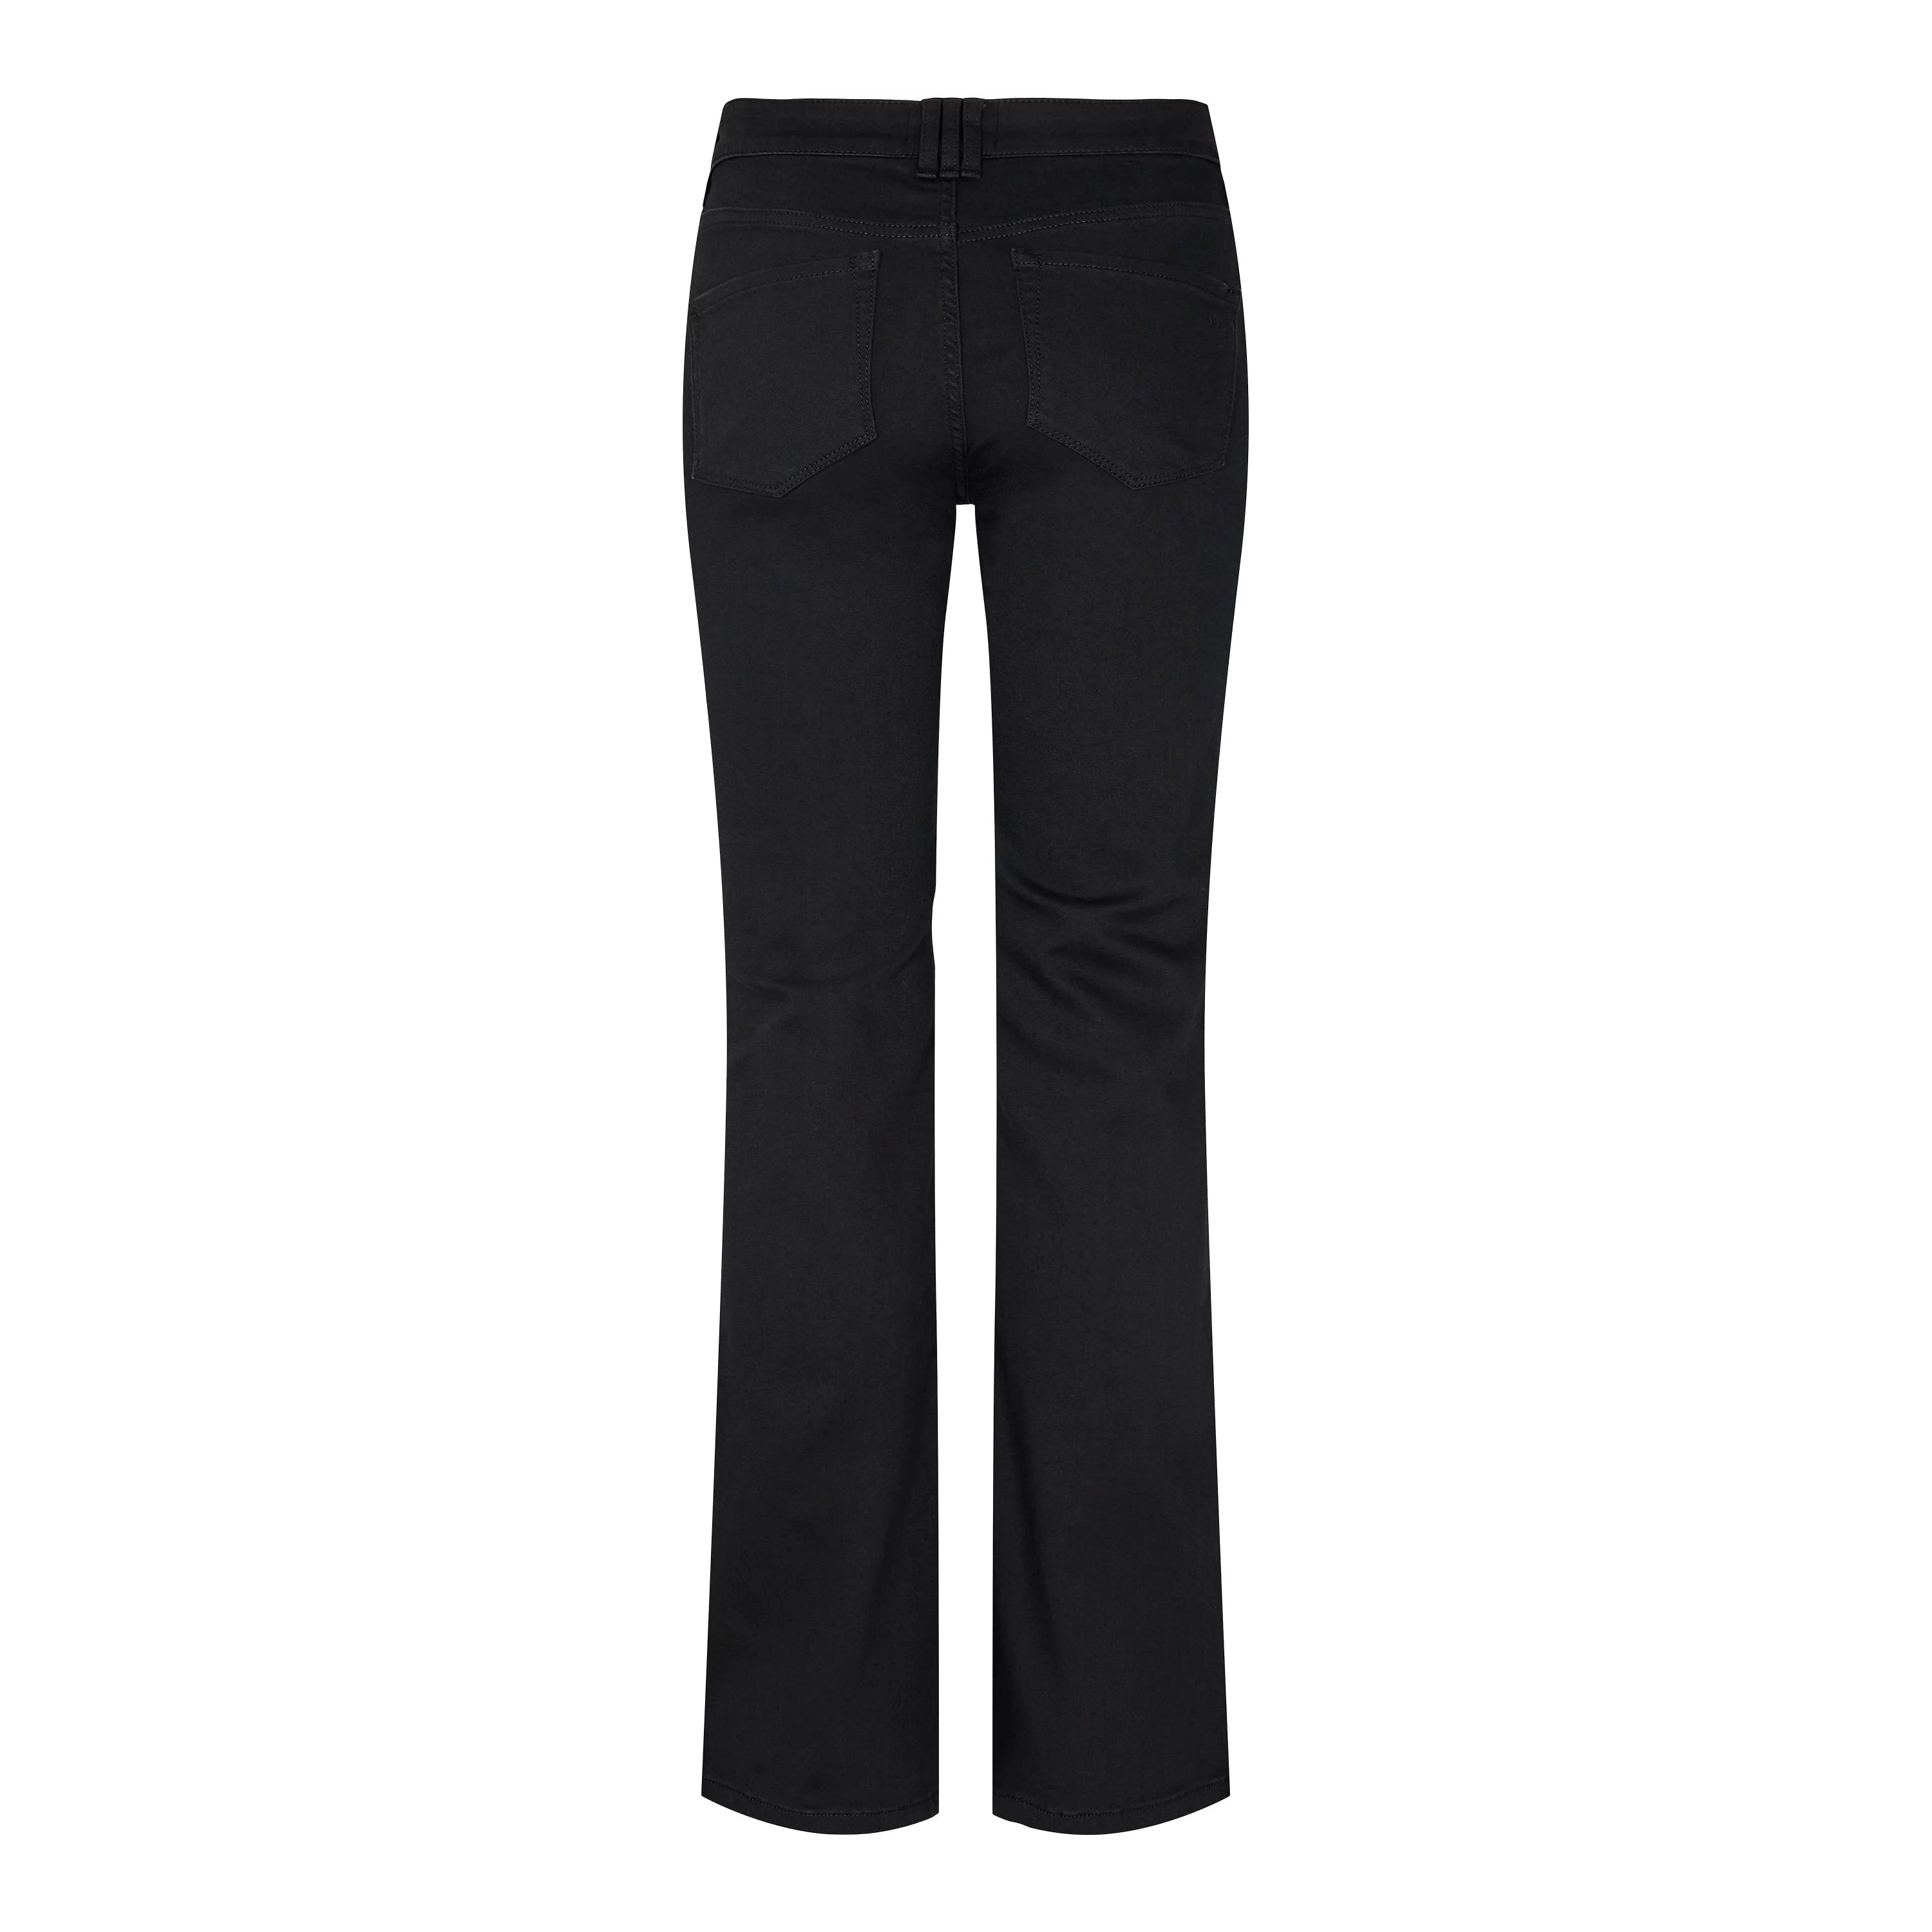 Ivy - Tara flare jeans Wash, cool excellent black 32" by Ivy | stylebykul